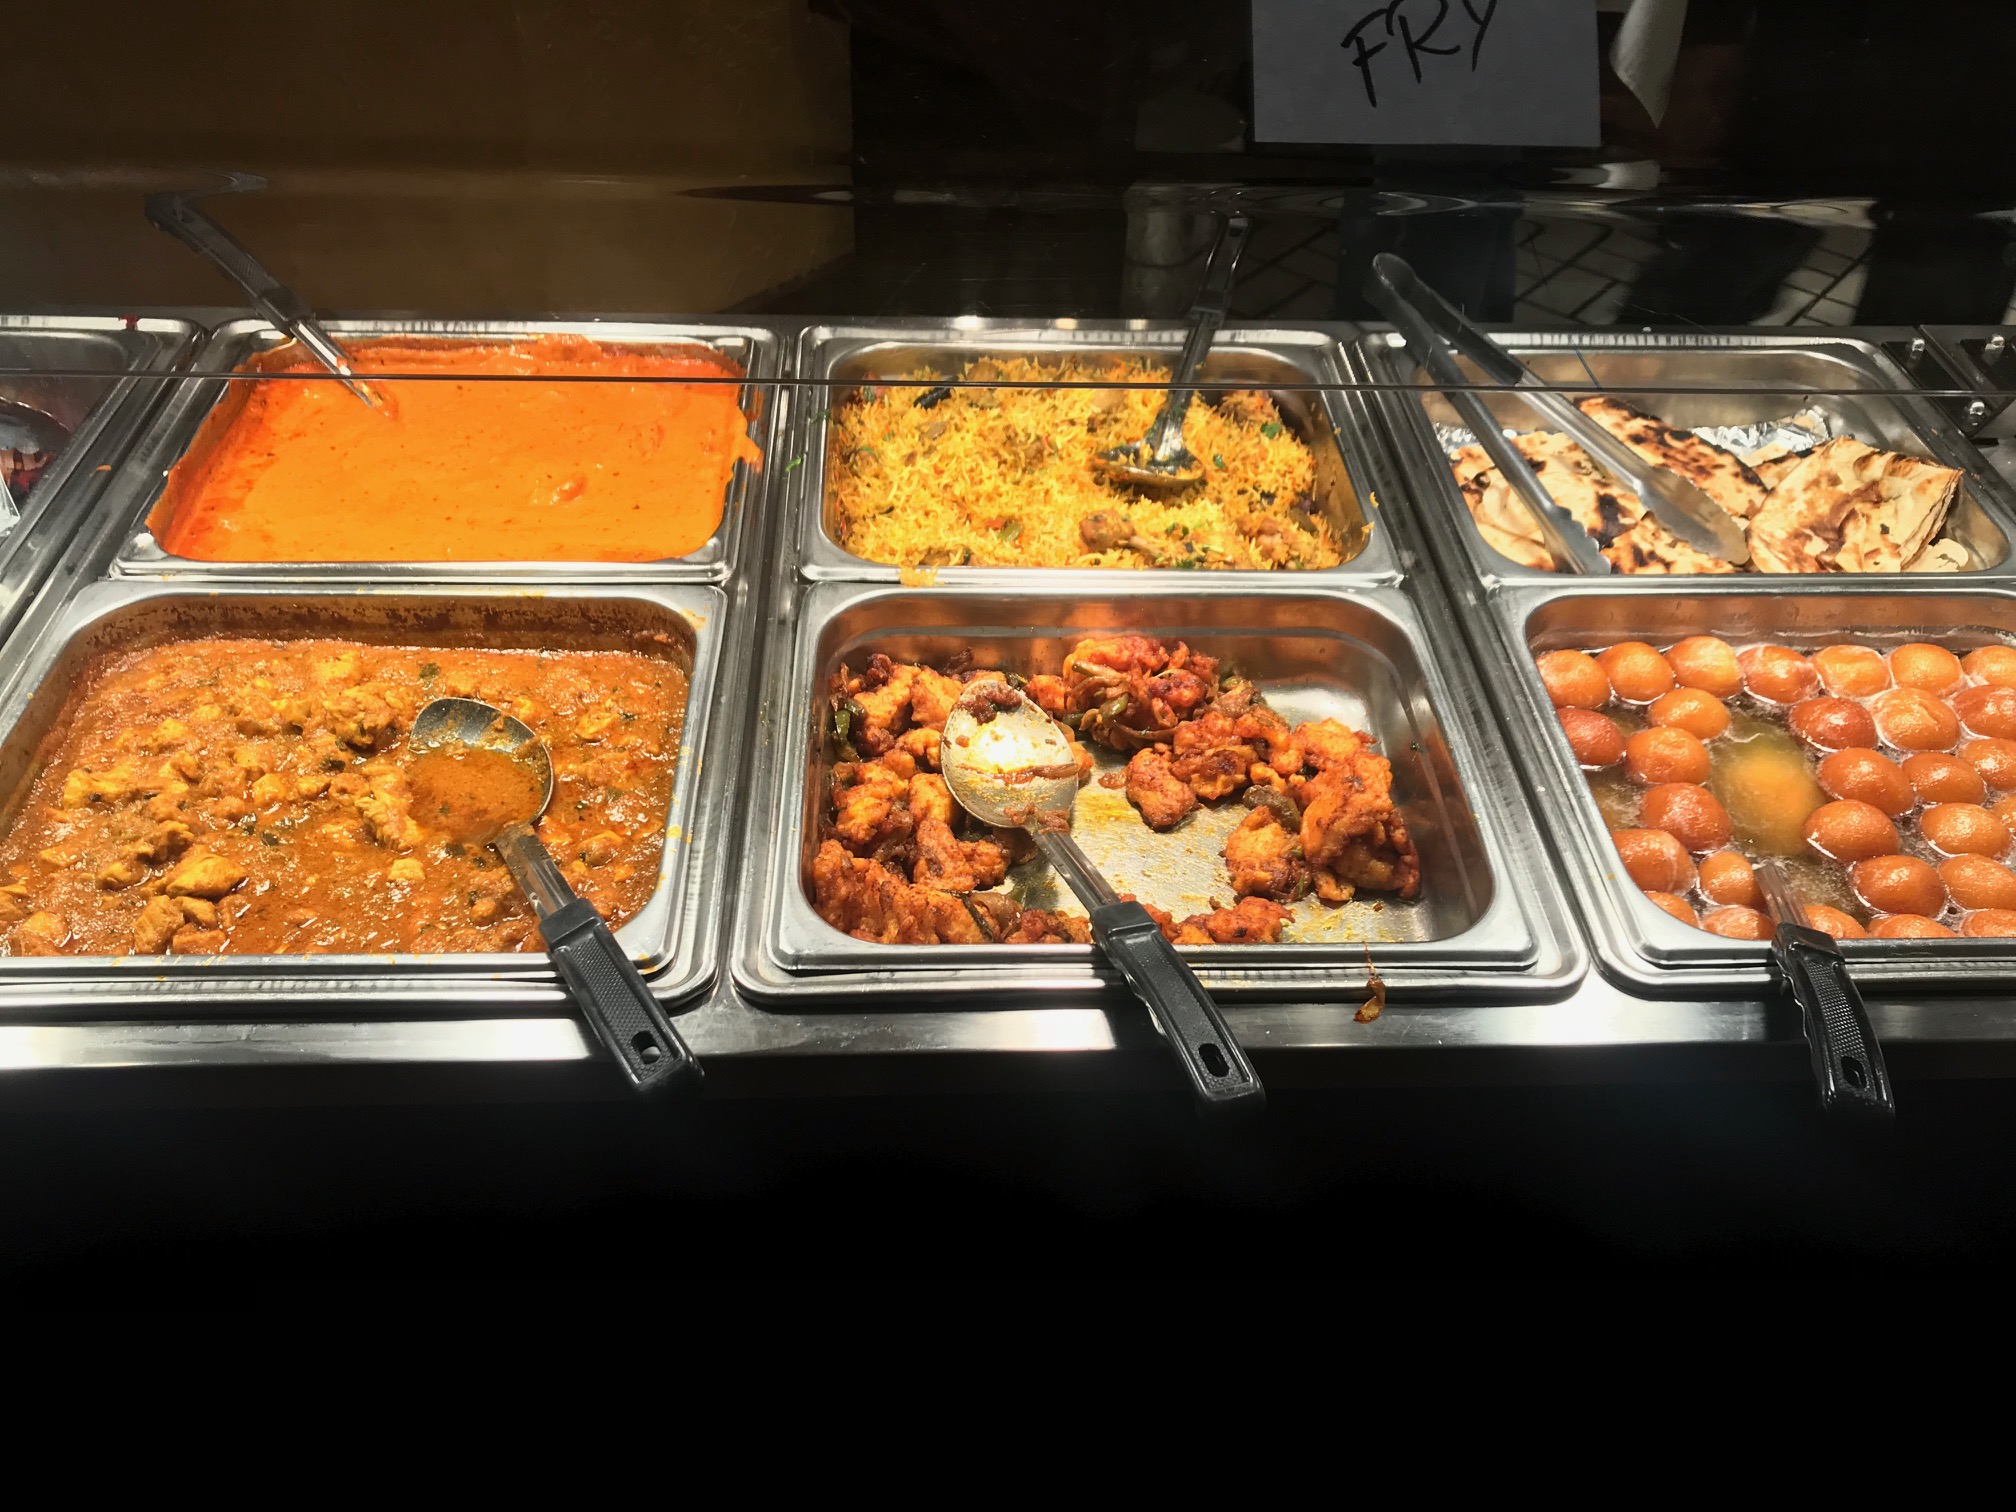 Authentic Indian Cuisine Plus An Awesome Buffet - Masala Indian Cuisine